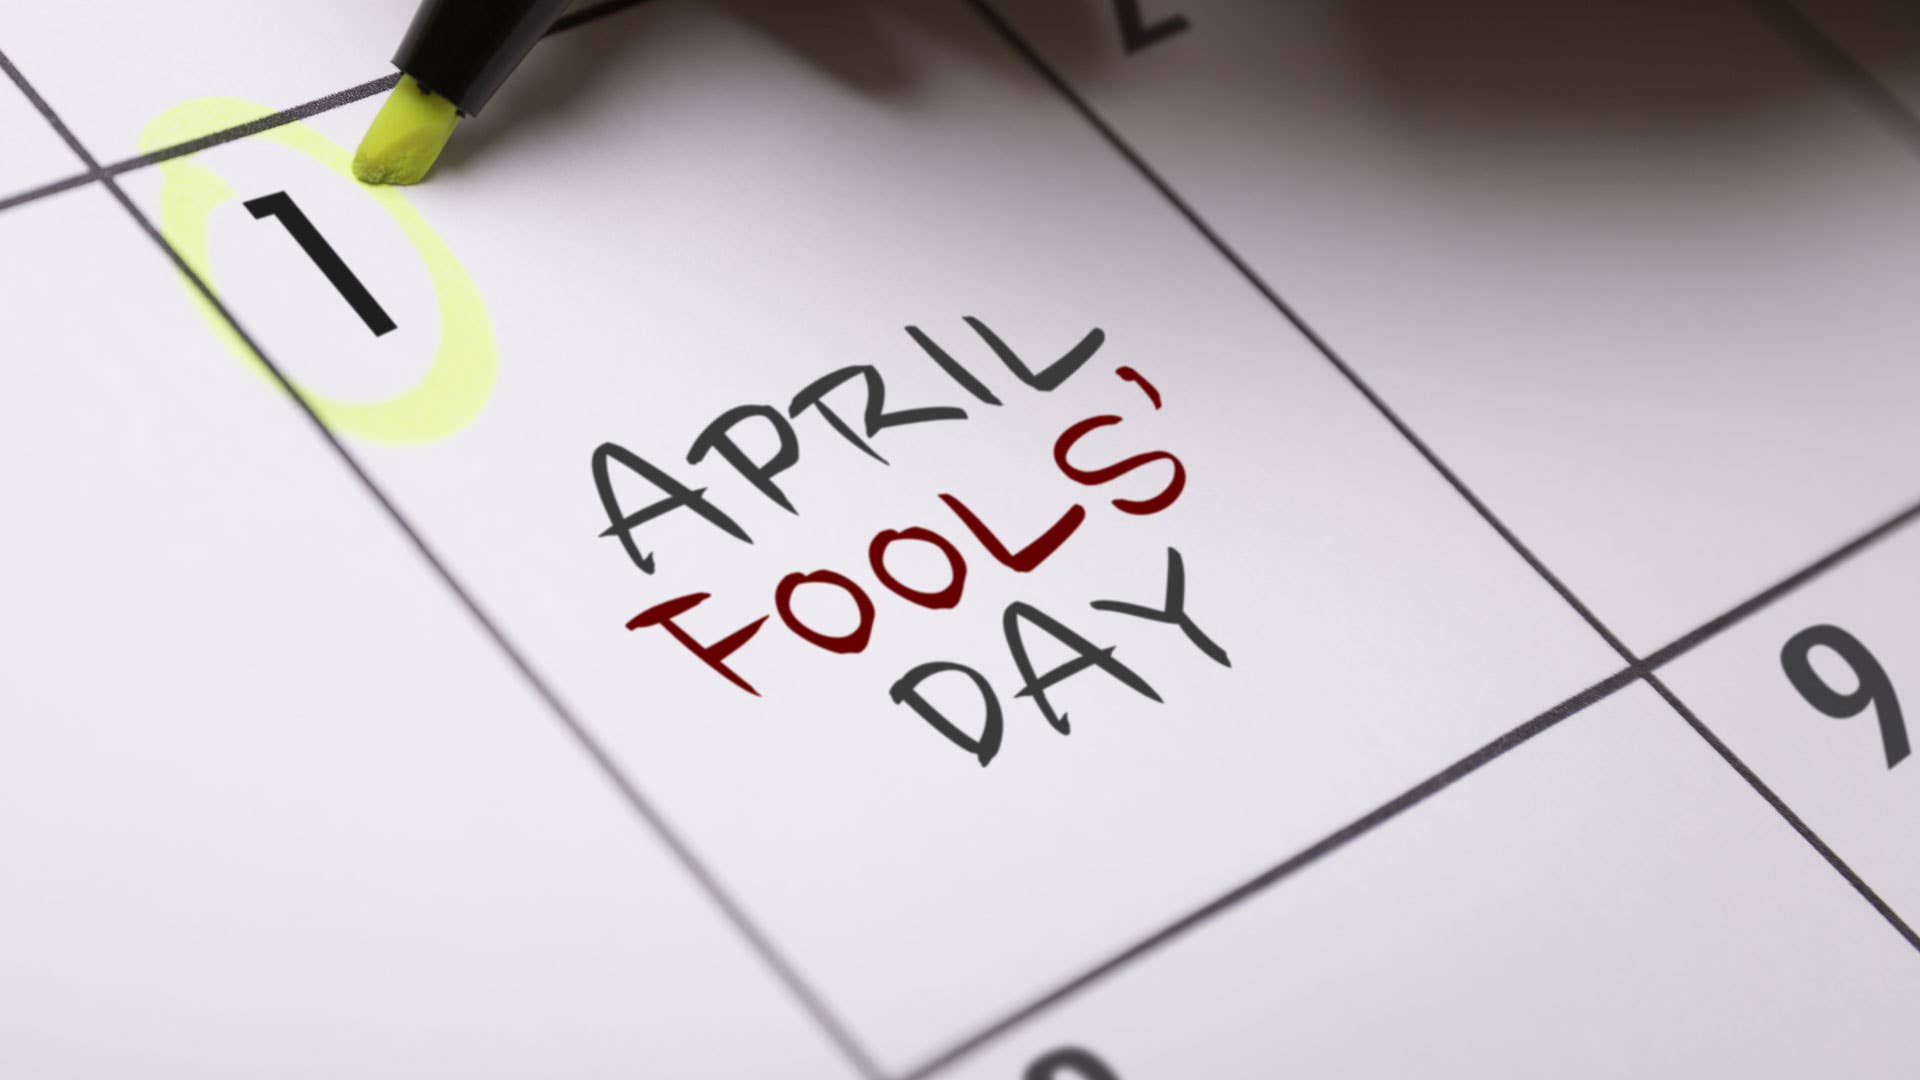 April Fools' Day circled on the calendar.